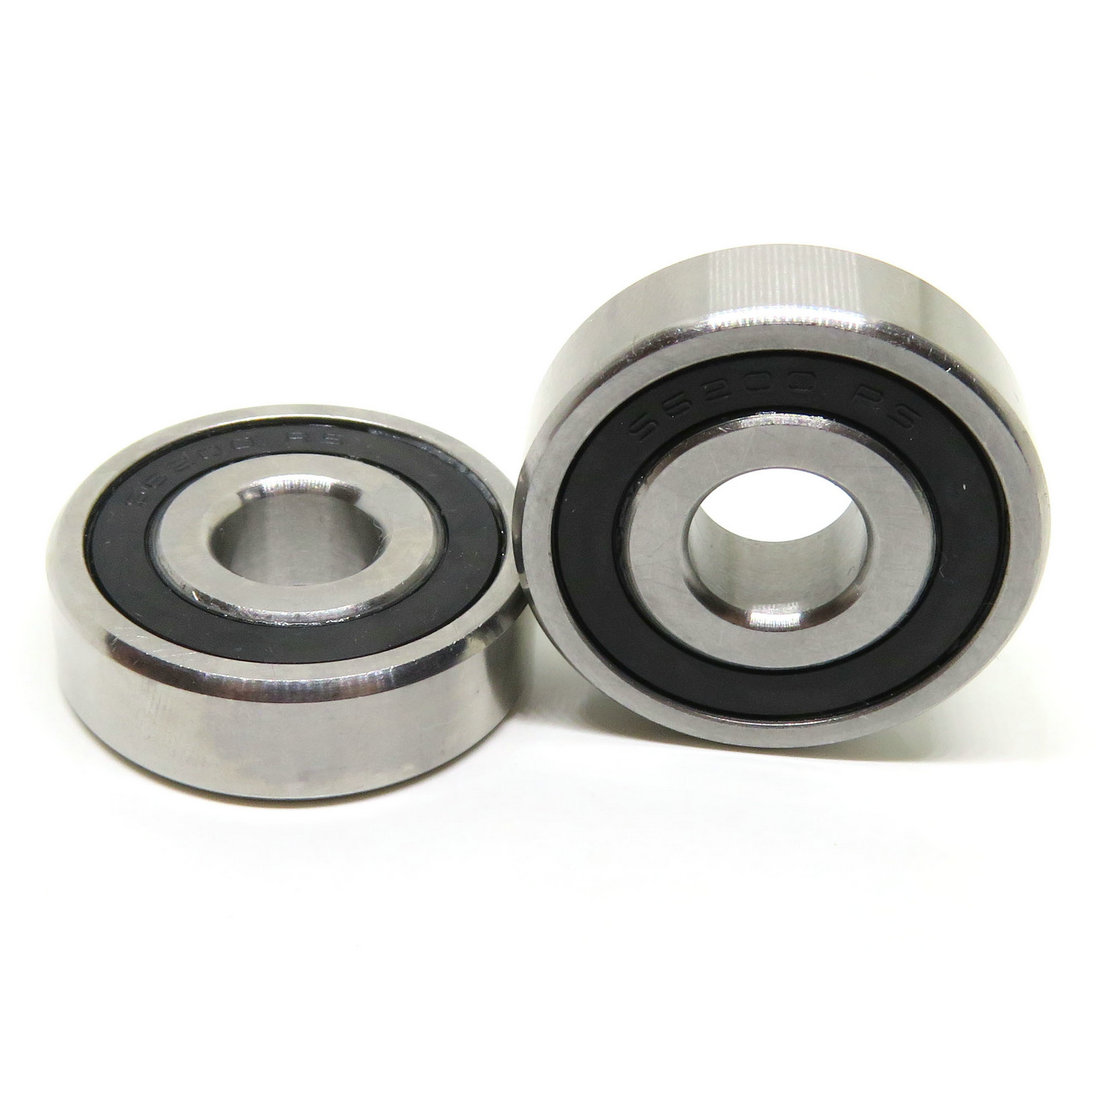 Washing Machines S6200RS 10x30x9mm 440C Stainless Steel S6200-2RS ABEC-3 Rubber Sealed Bearing.jpg